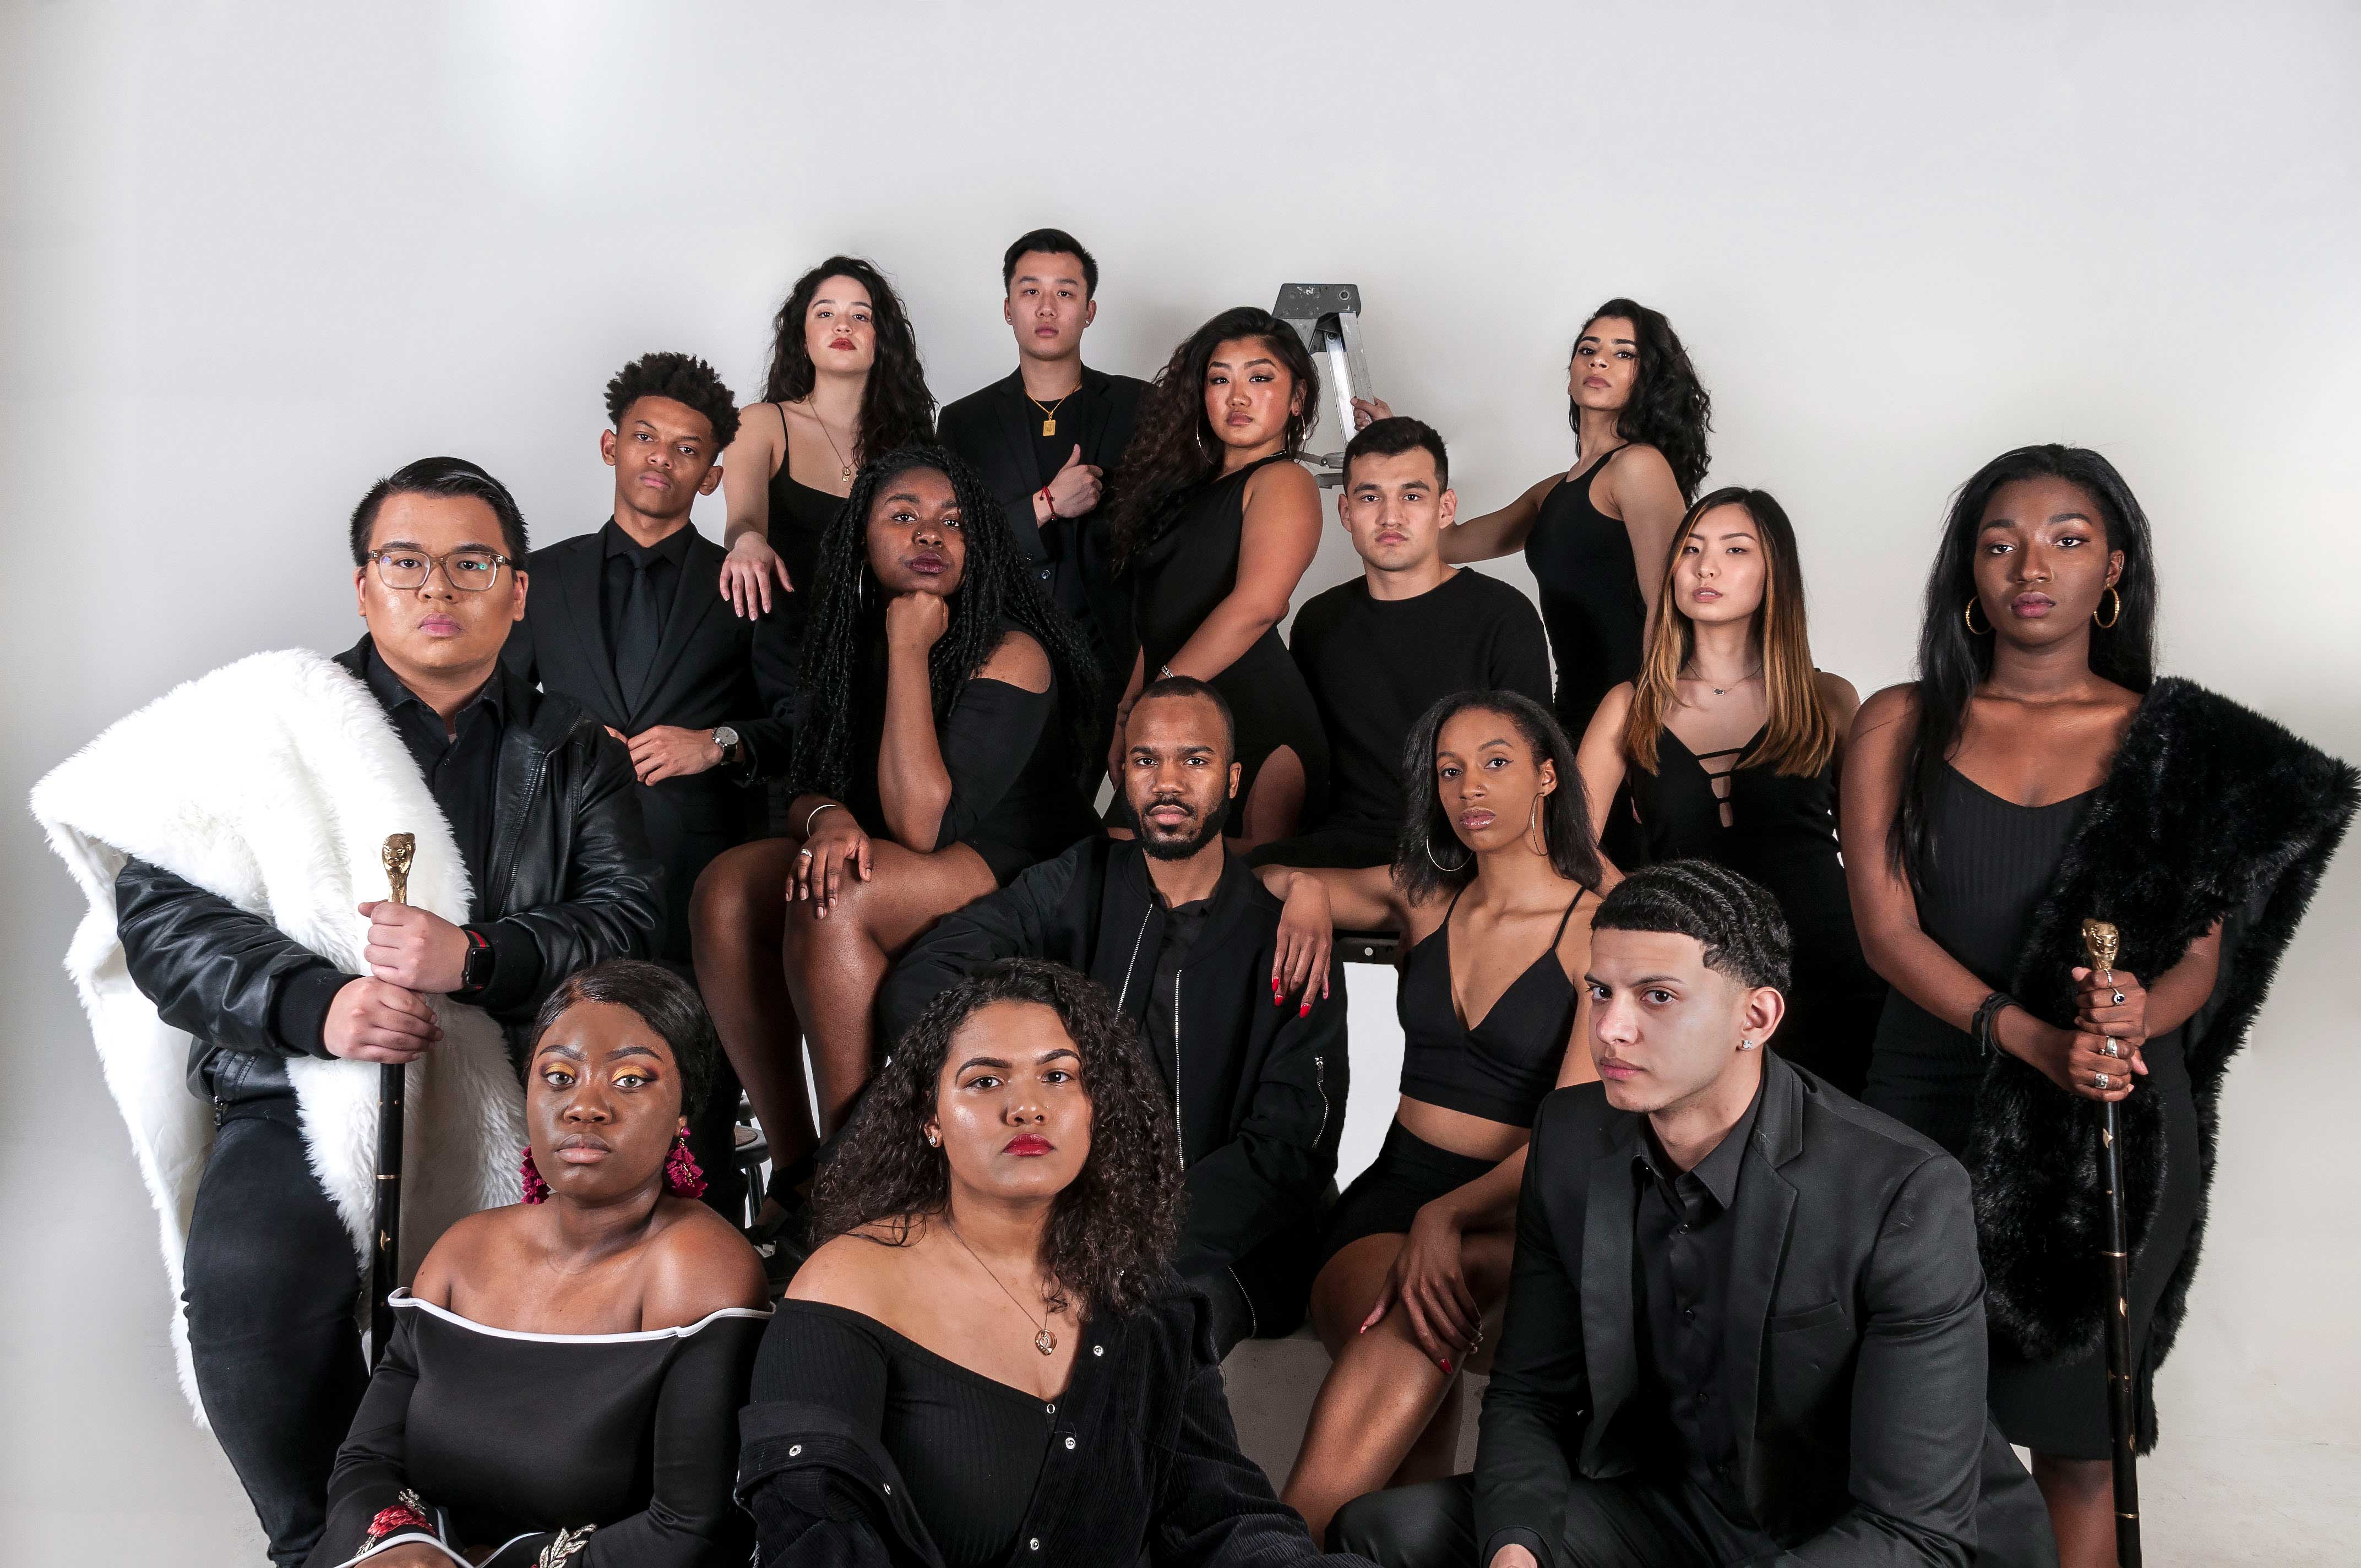 The BSA Fashion Show cast posing for a serious promotional photo in all black outfits against a plain white background